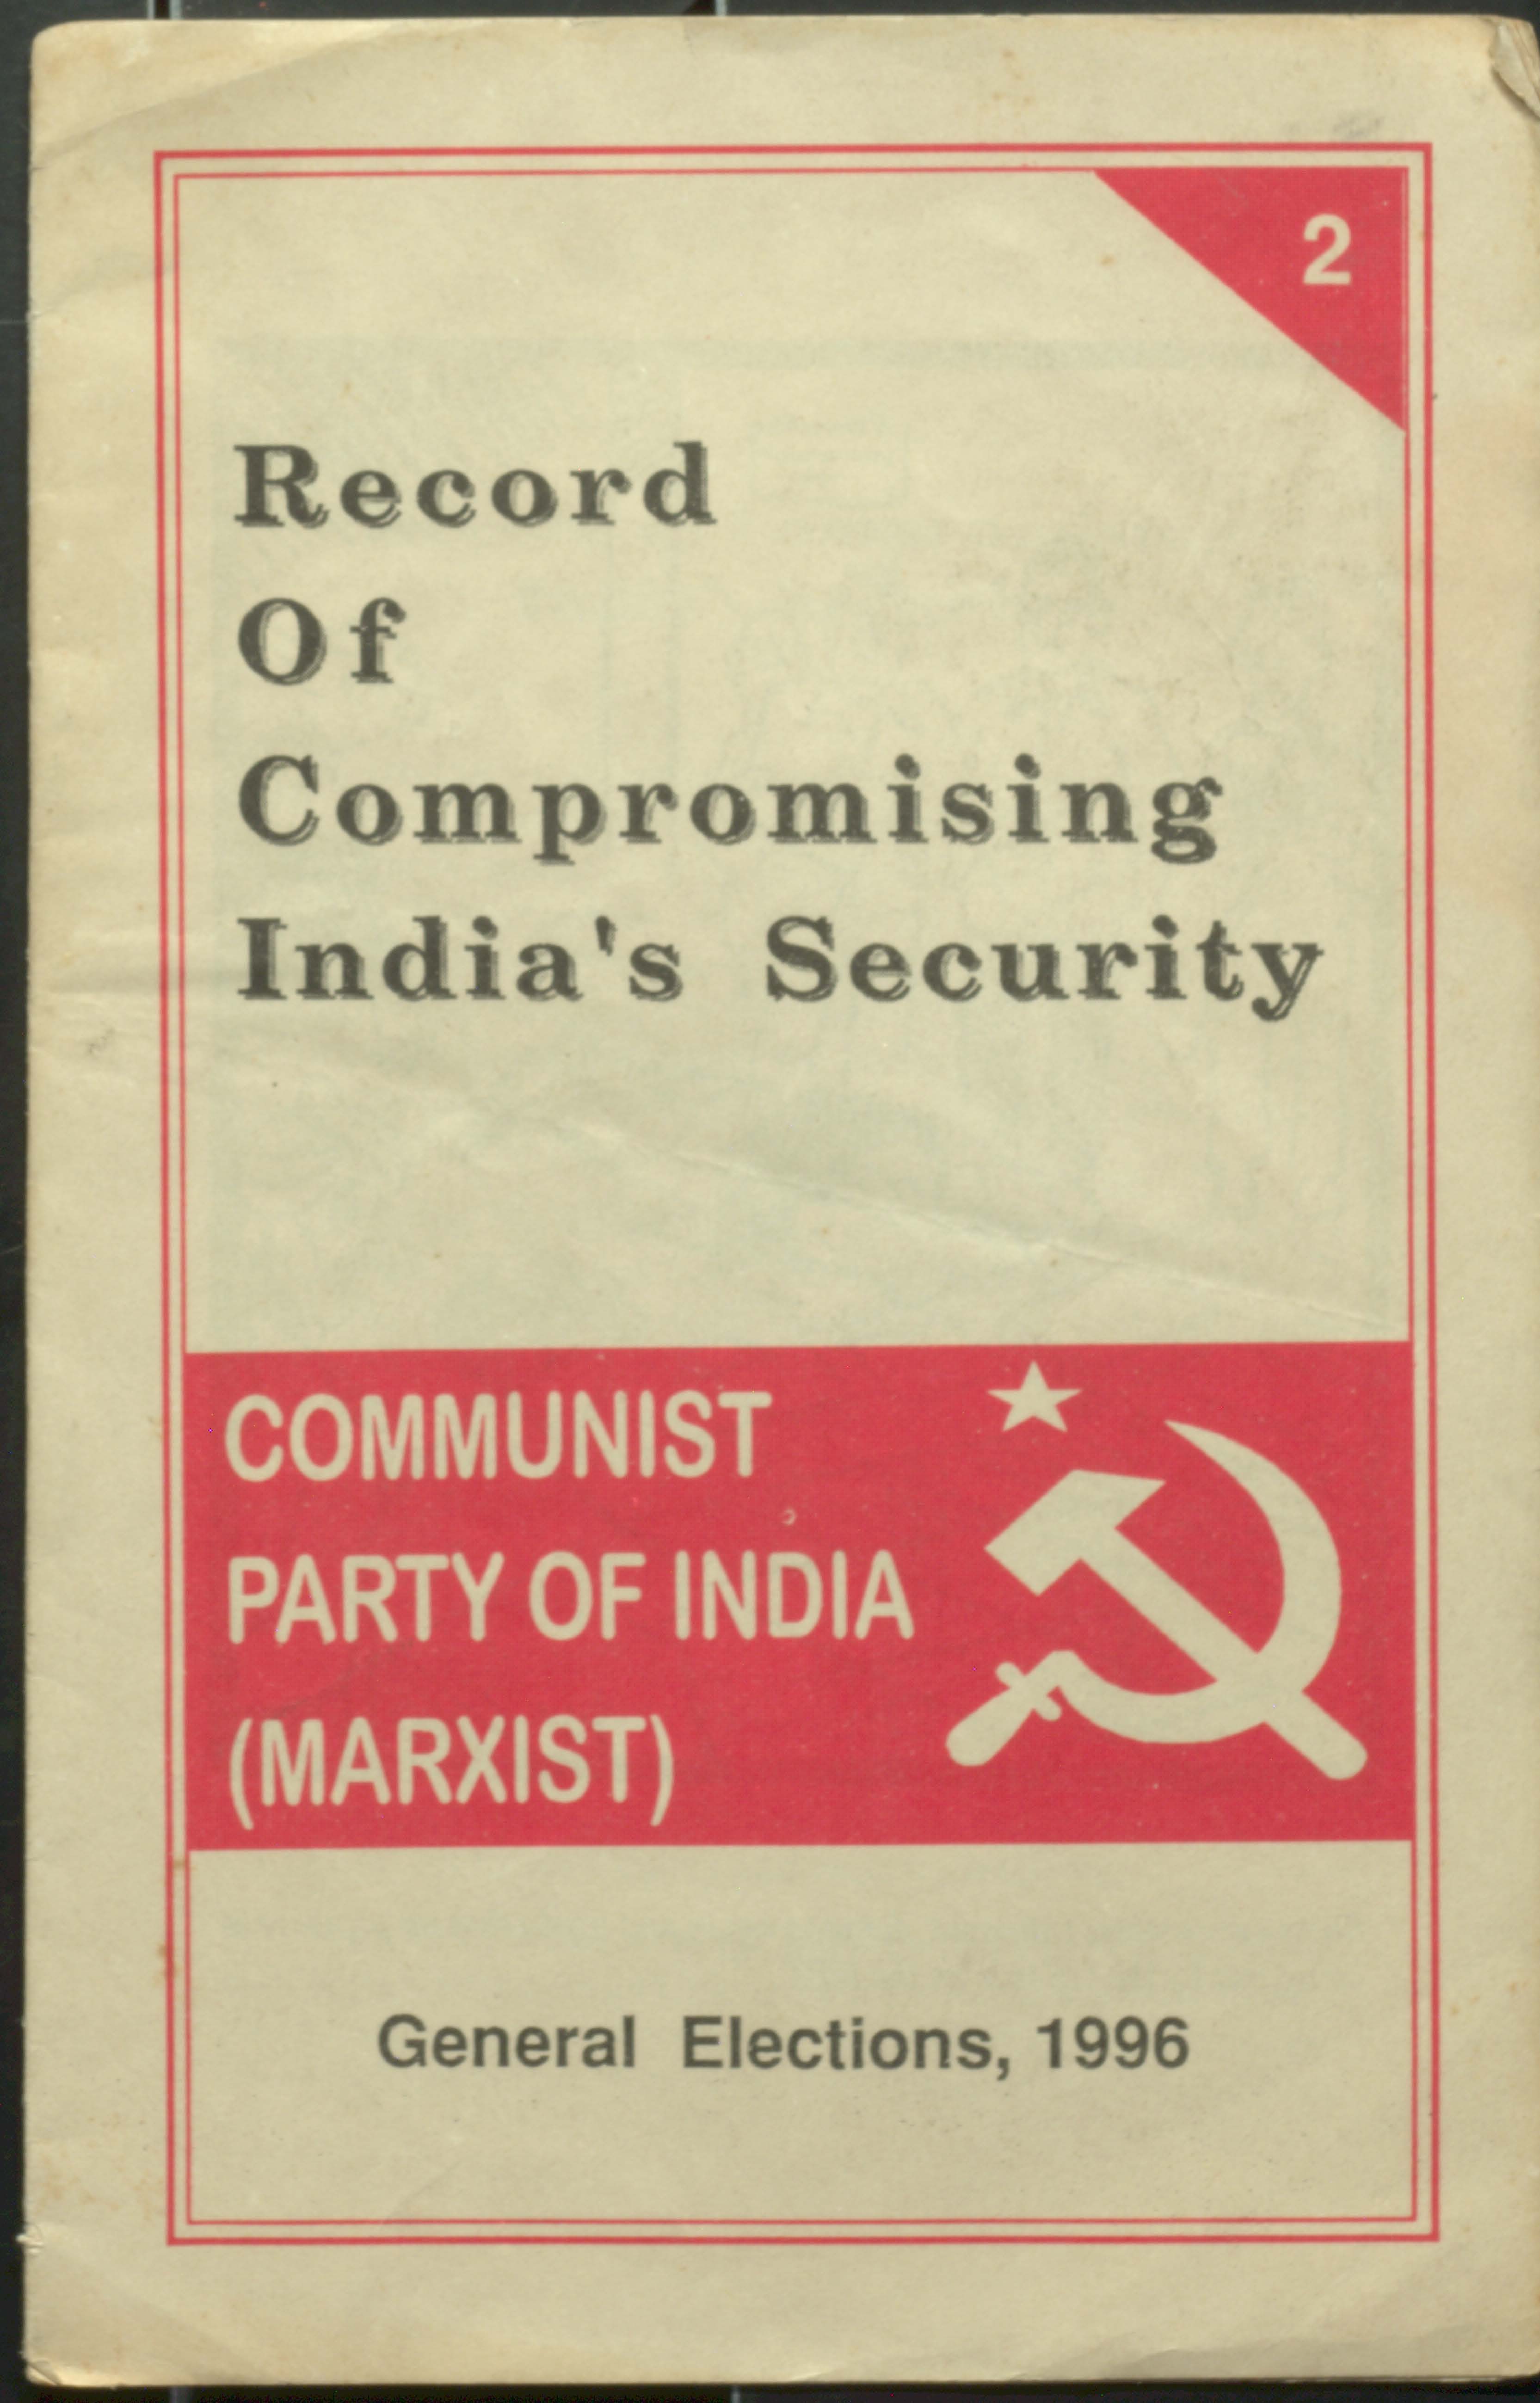 Record of compromising india's security